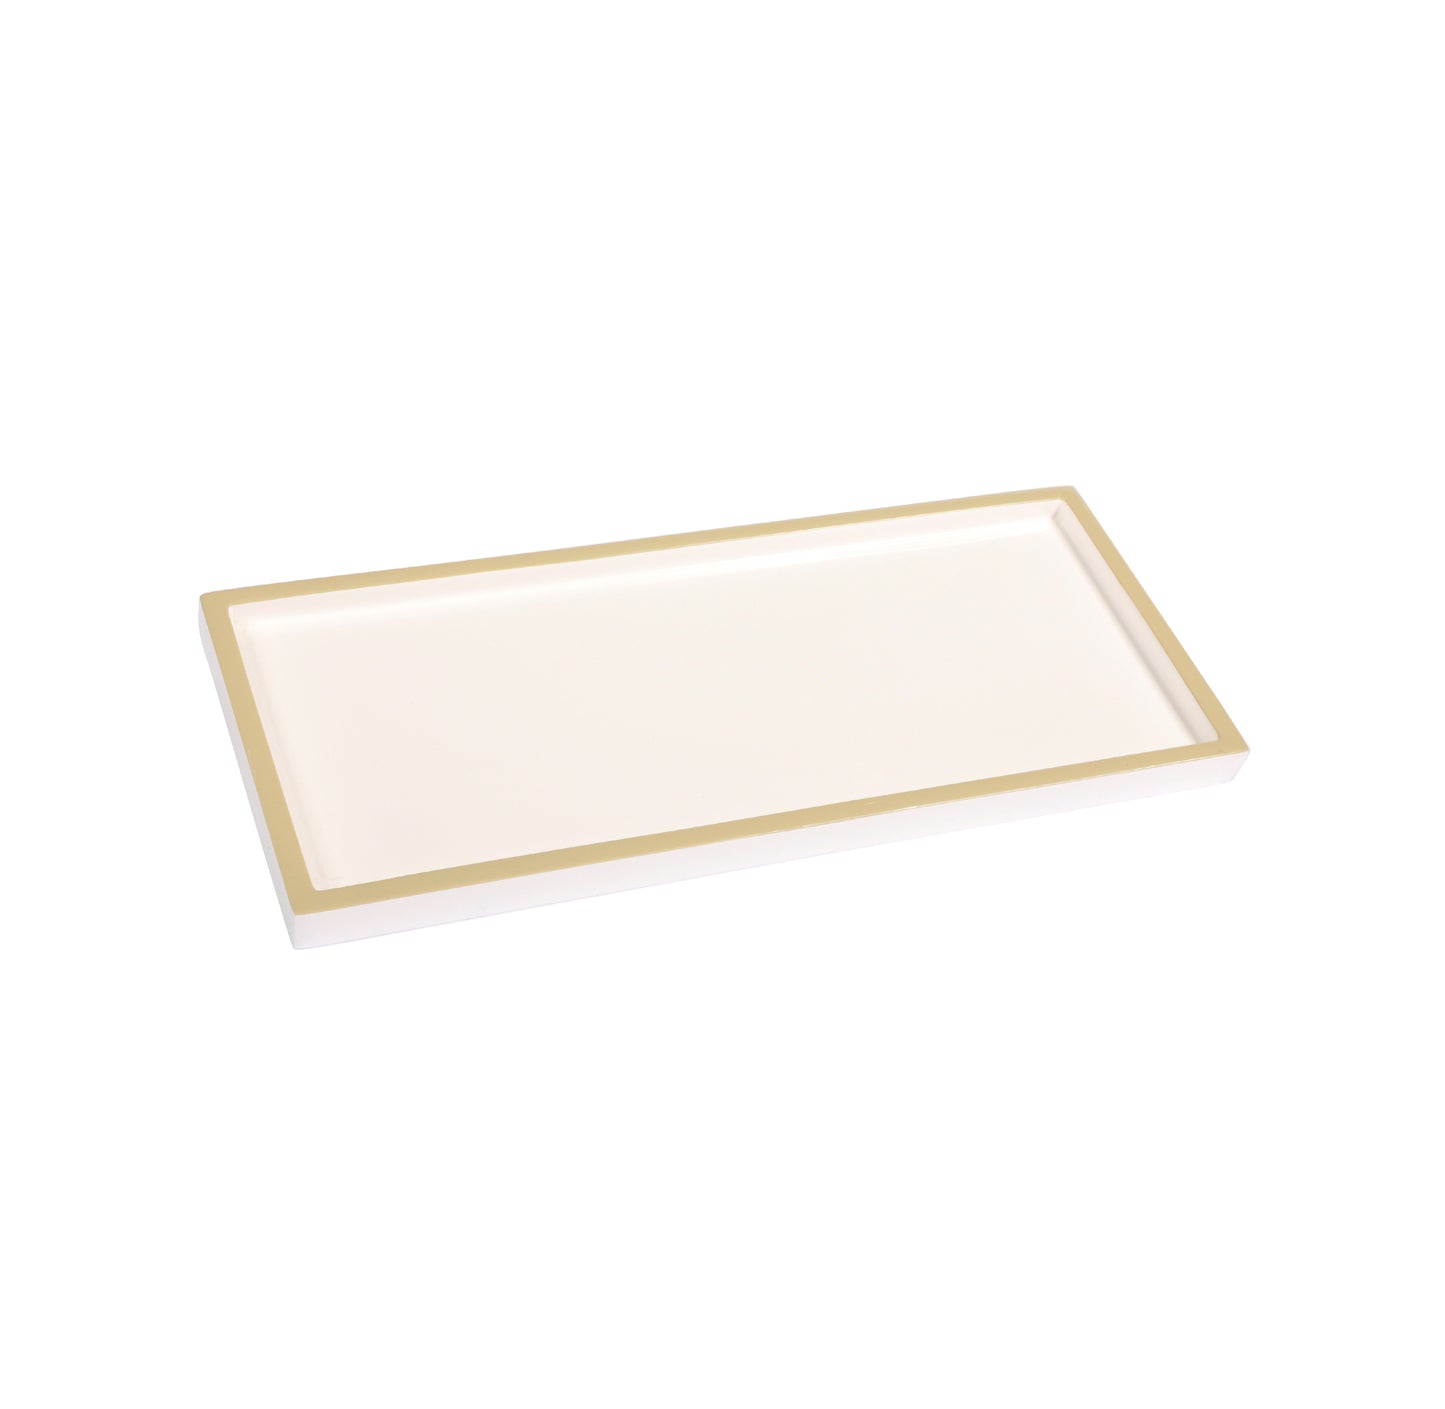 Lacquer Long Tray White and Taupe Joanna Wood Shop